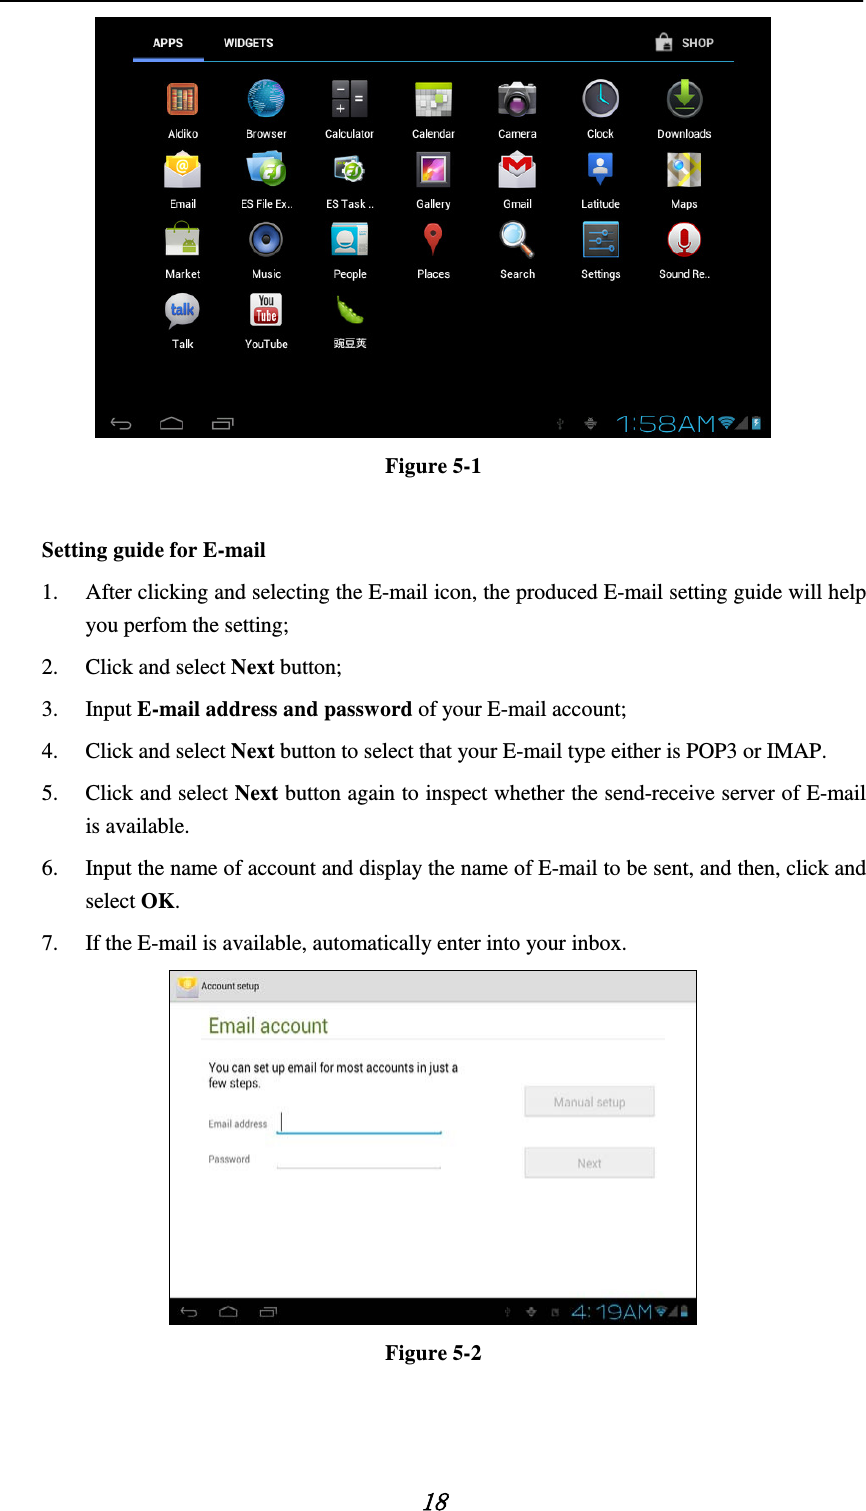   18  Figure 5-1  Setting guide for E-mail   1. After clicking and selecting the E-mail icon, the produced E-mail setting guide will help you perfom the setting;   2. Click and select Next button;   3. Input E-mail address and password of your E-mail account;     4. Click and select Next button to select that your E-mail type either is POP3 or IMAP. 5. Click and select Next button again to inspect whether the send-receive server of E-mail is available.   6. Input the name of account and display the name of E-mail to be sent, and then, click and select OK. 7. If the E-mail is available, automatically enter into your inbox.  Figure 5-2   